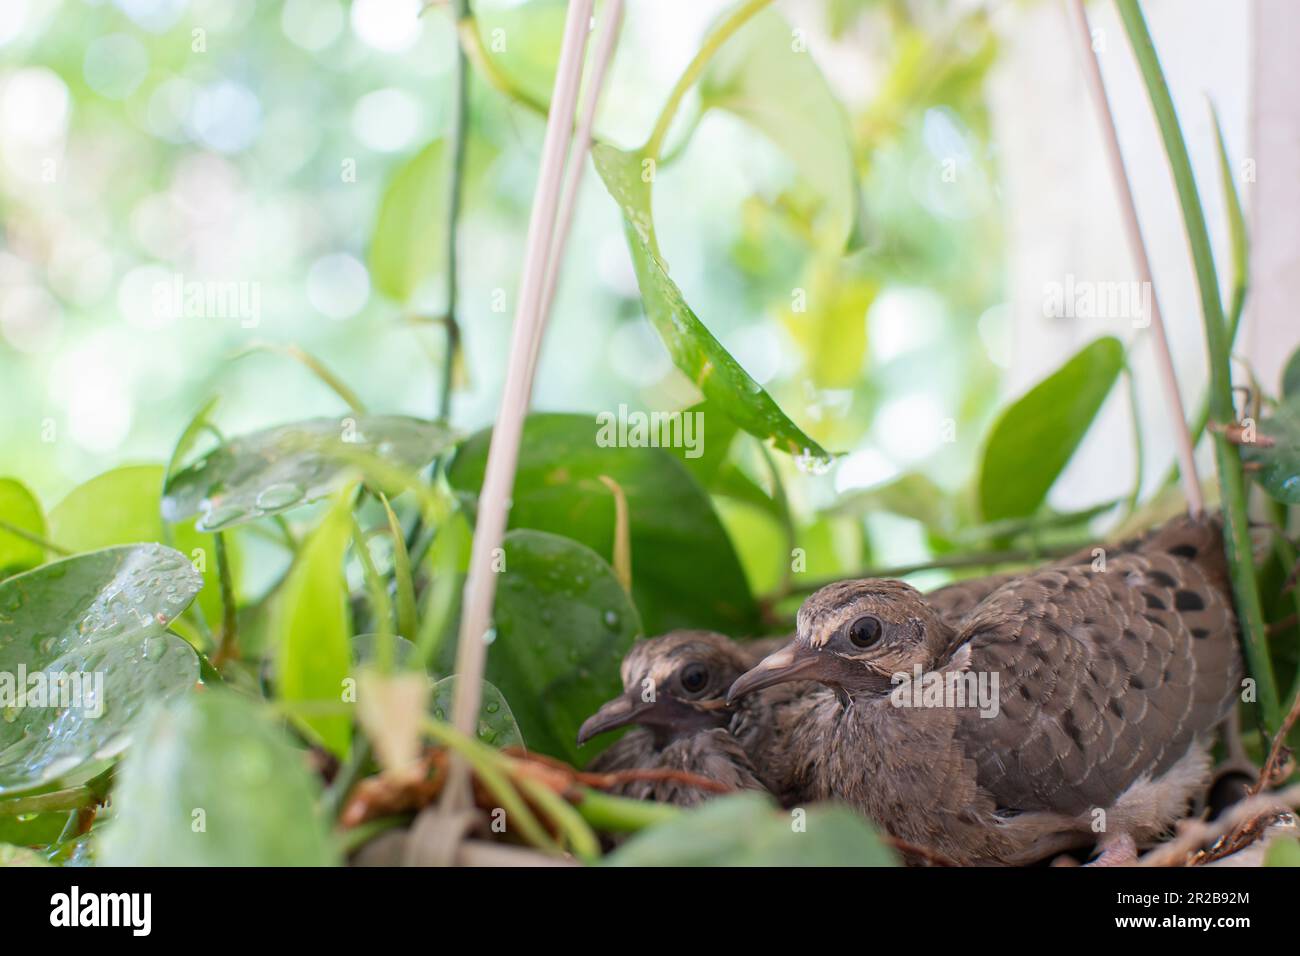 Two baby mourning doves fledgling sitting in their nest in the hanging basket. Stock Photo